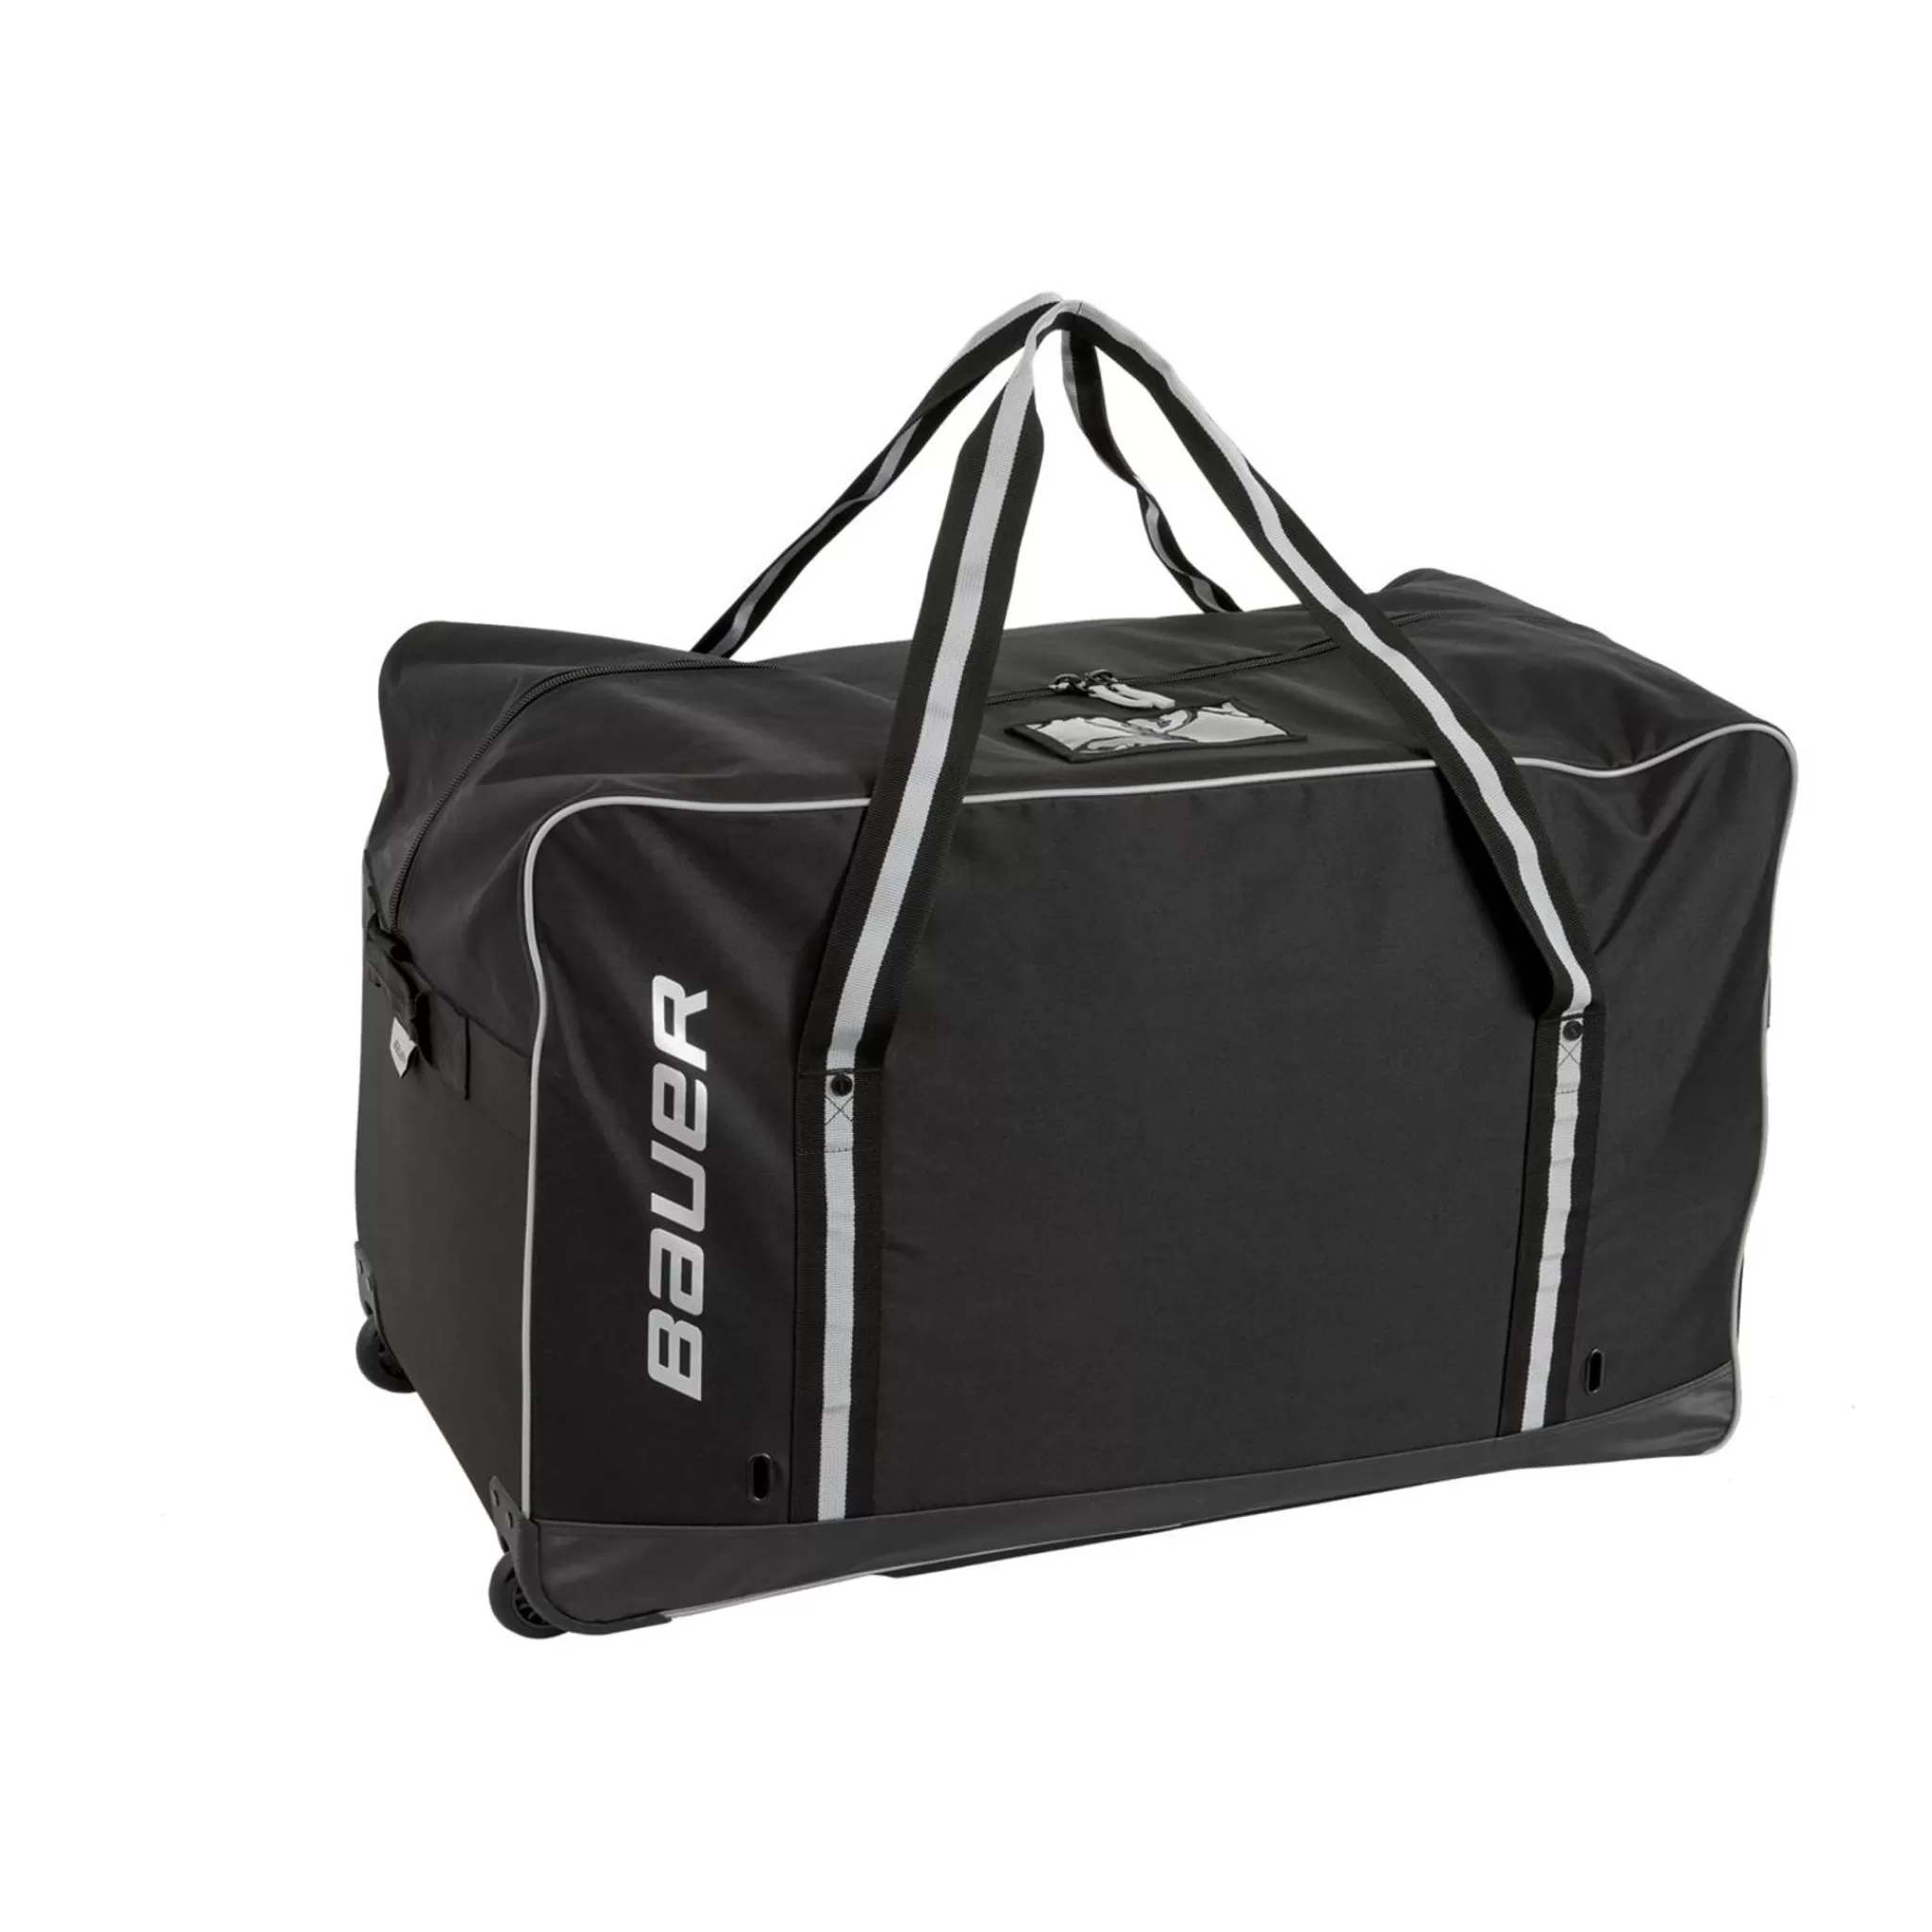 Clearance bauer S21 Core Wheeled Bag Sr 23/24, Hockeybag